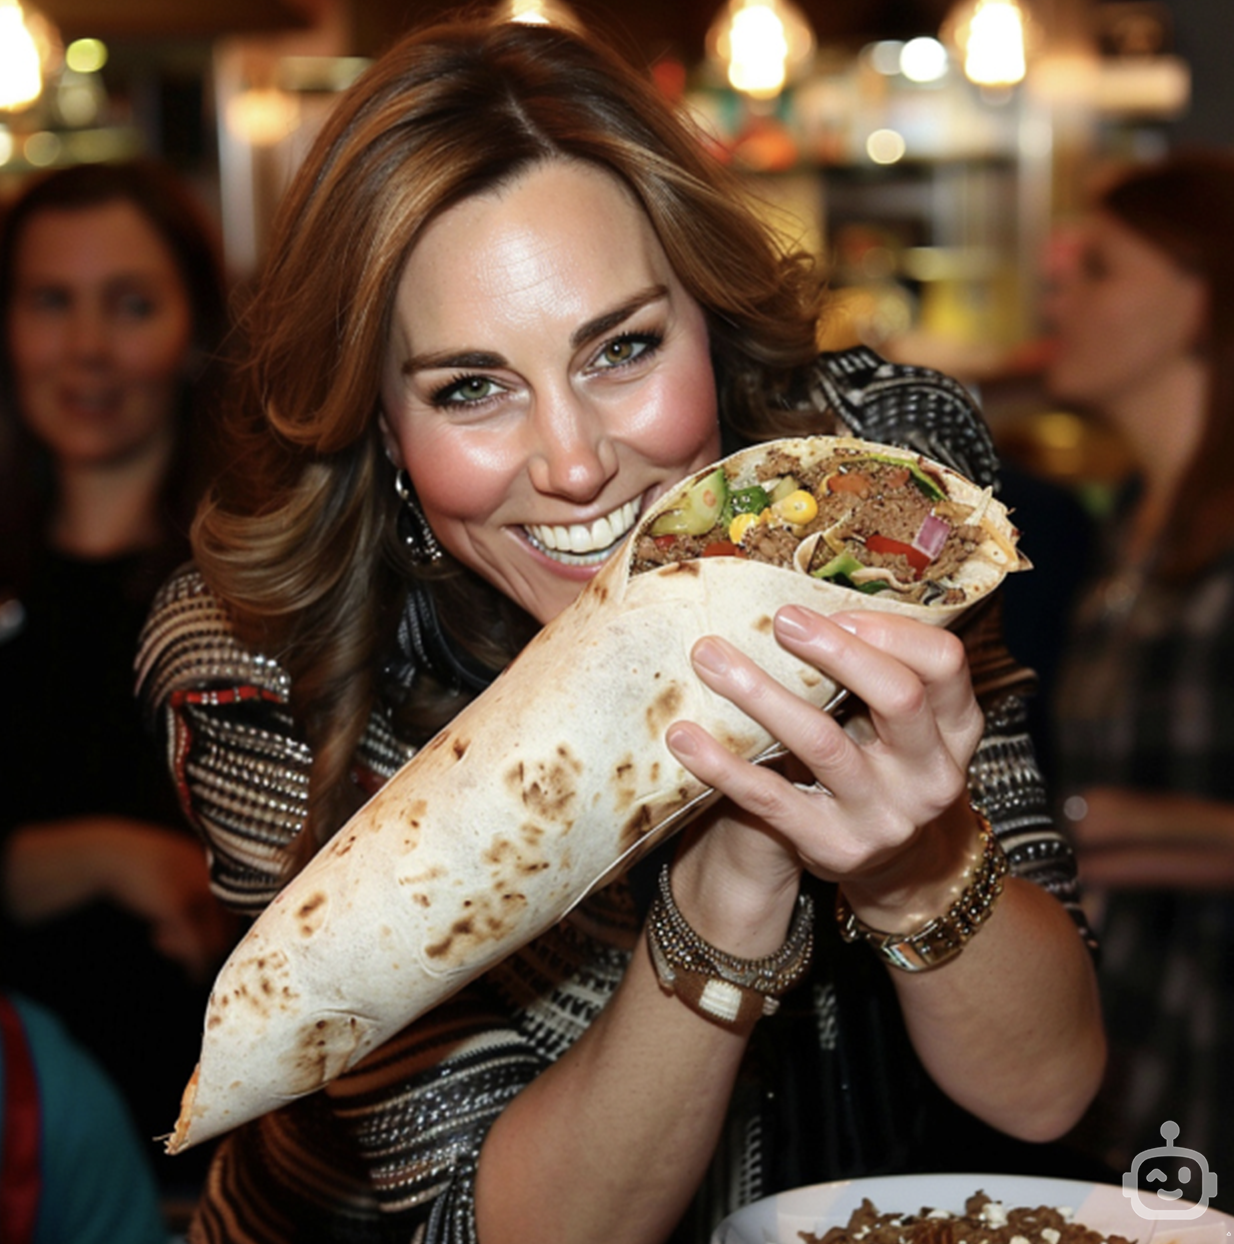 Person smiling at camera holding a large, stuffed wrap near their face